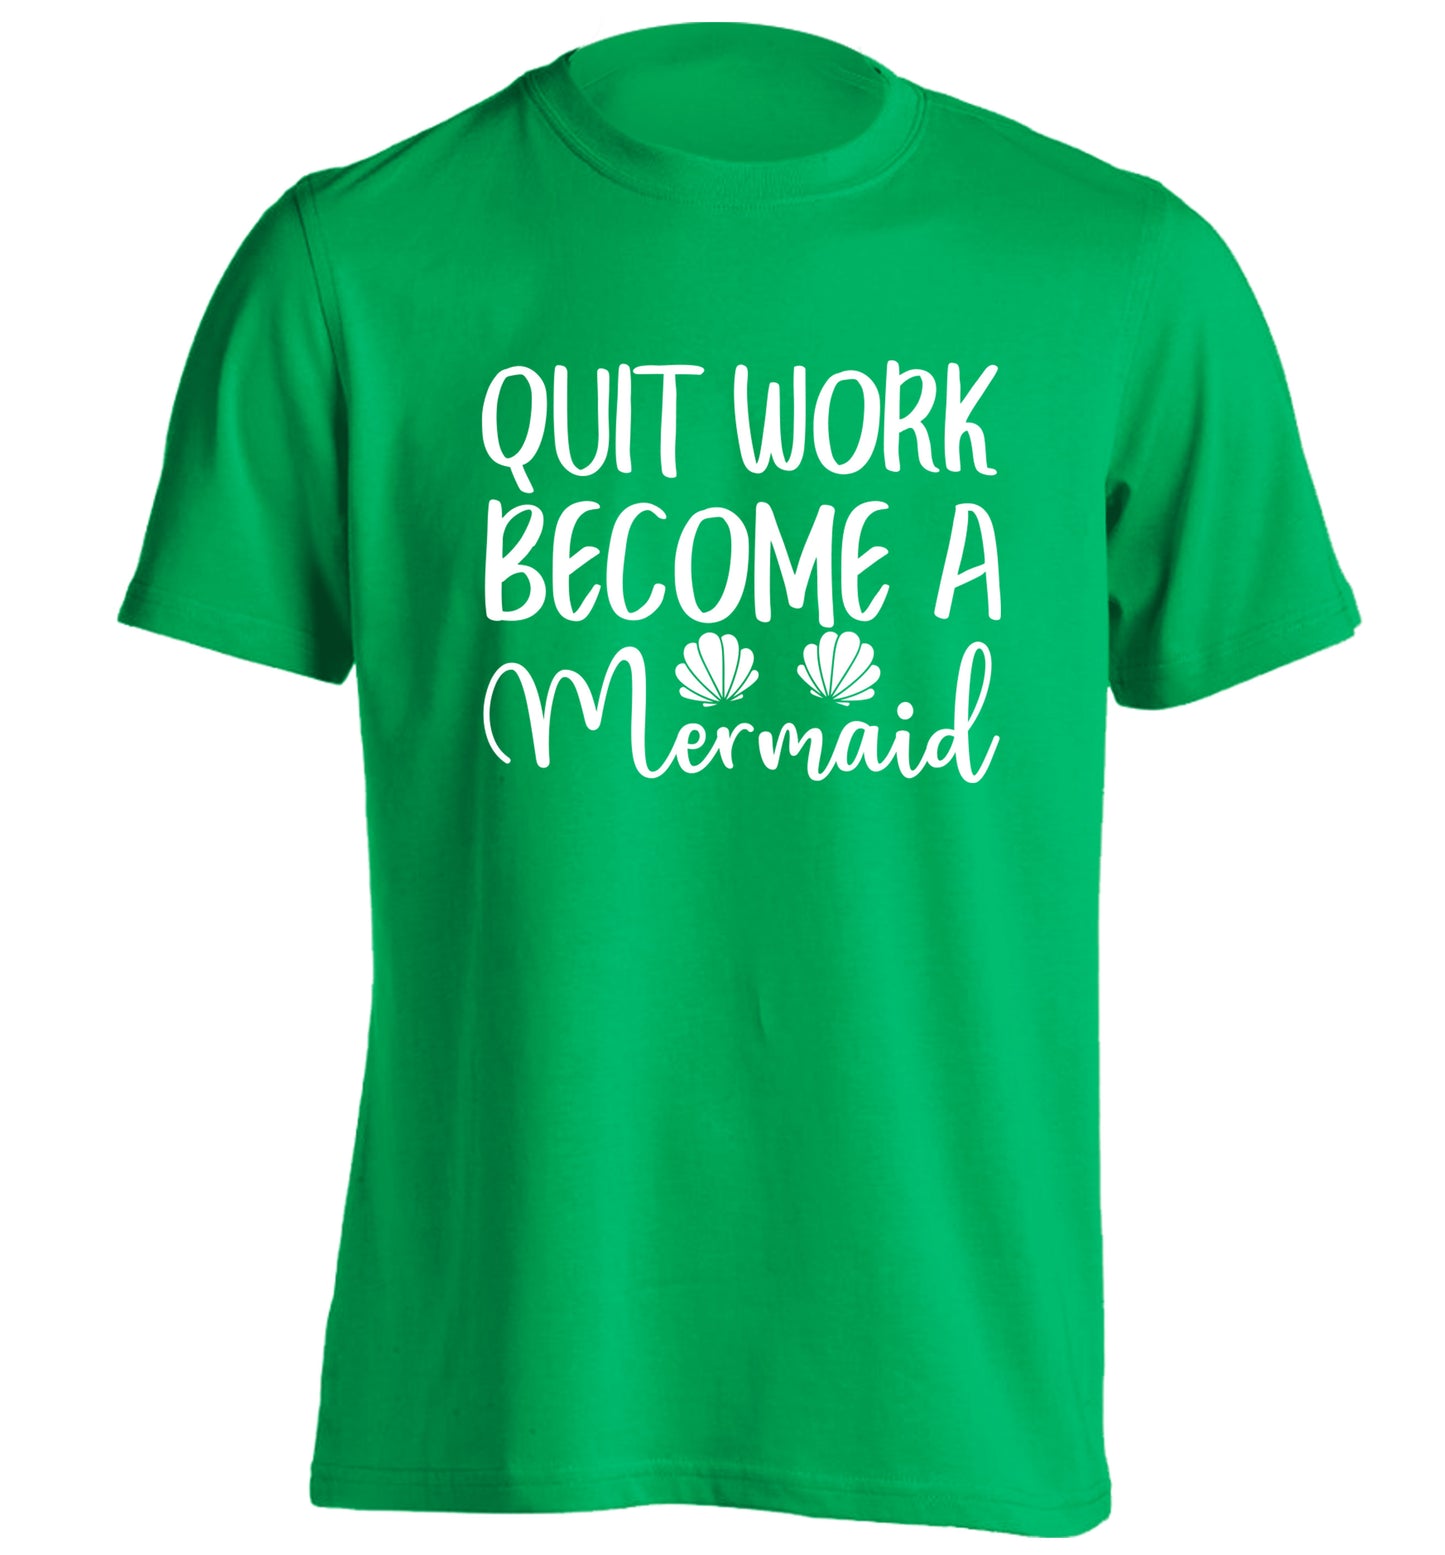 Quit work become a mermaid adults unisex green Tshirt 2XL